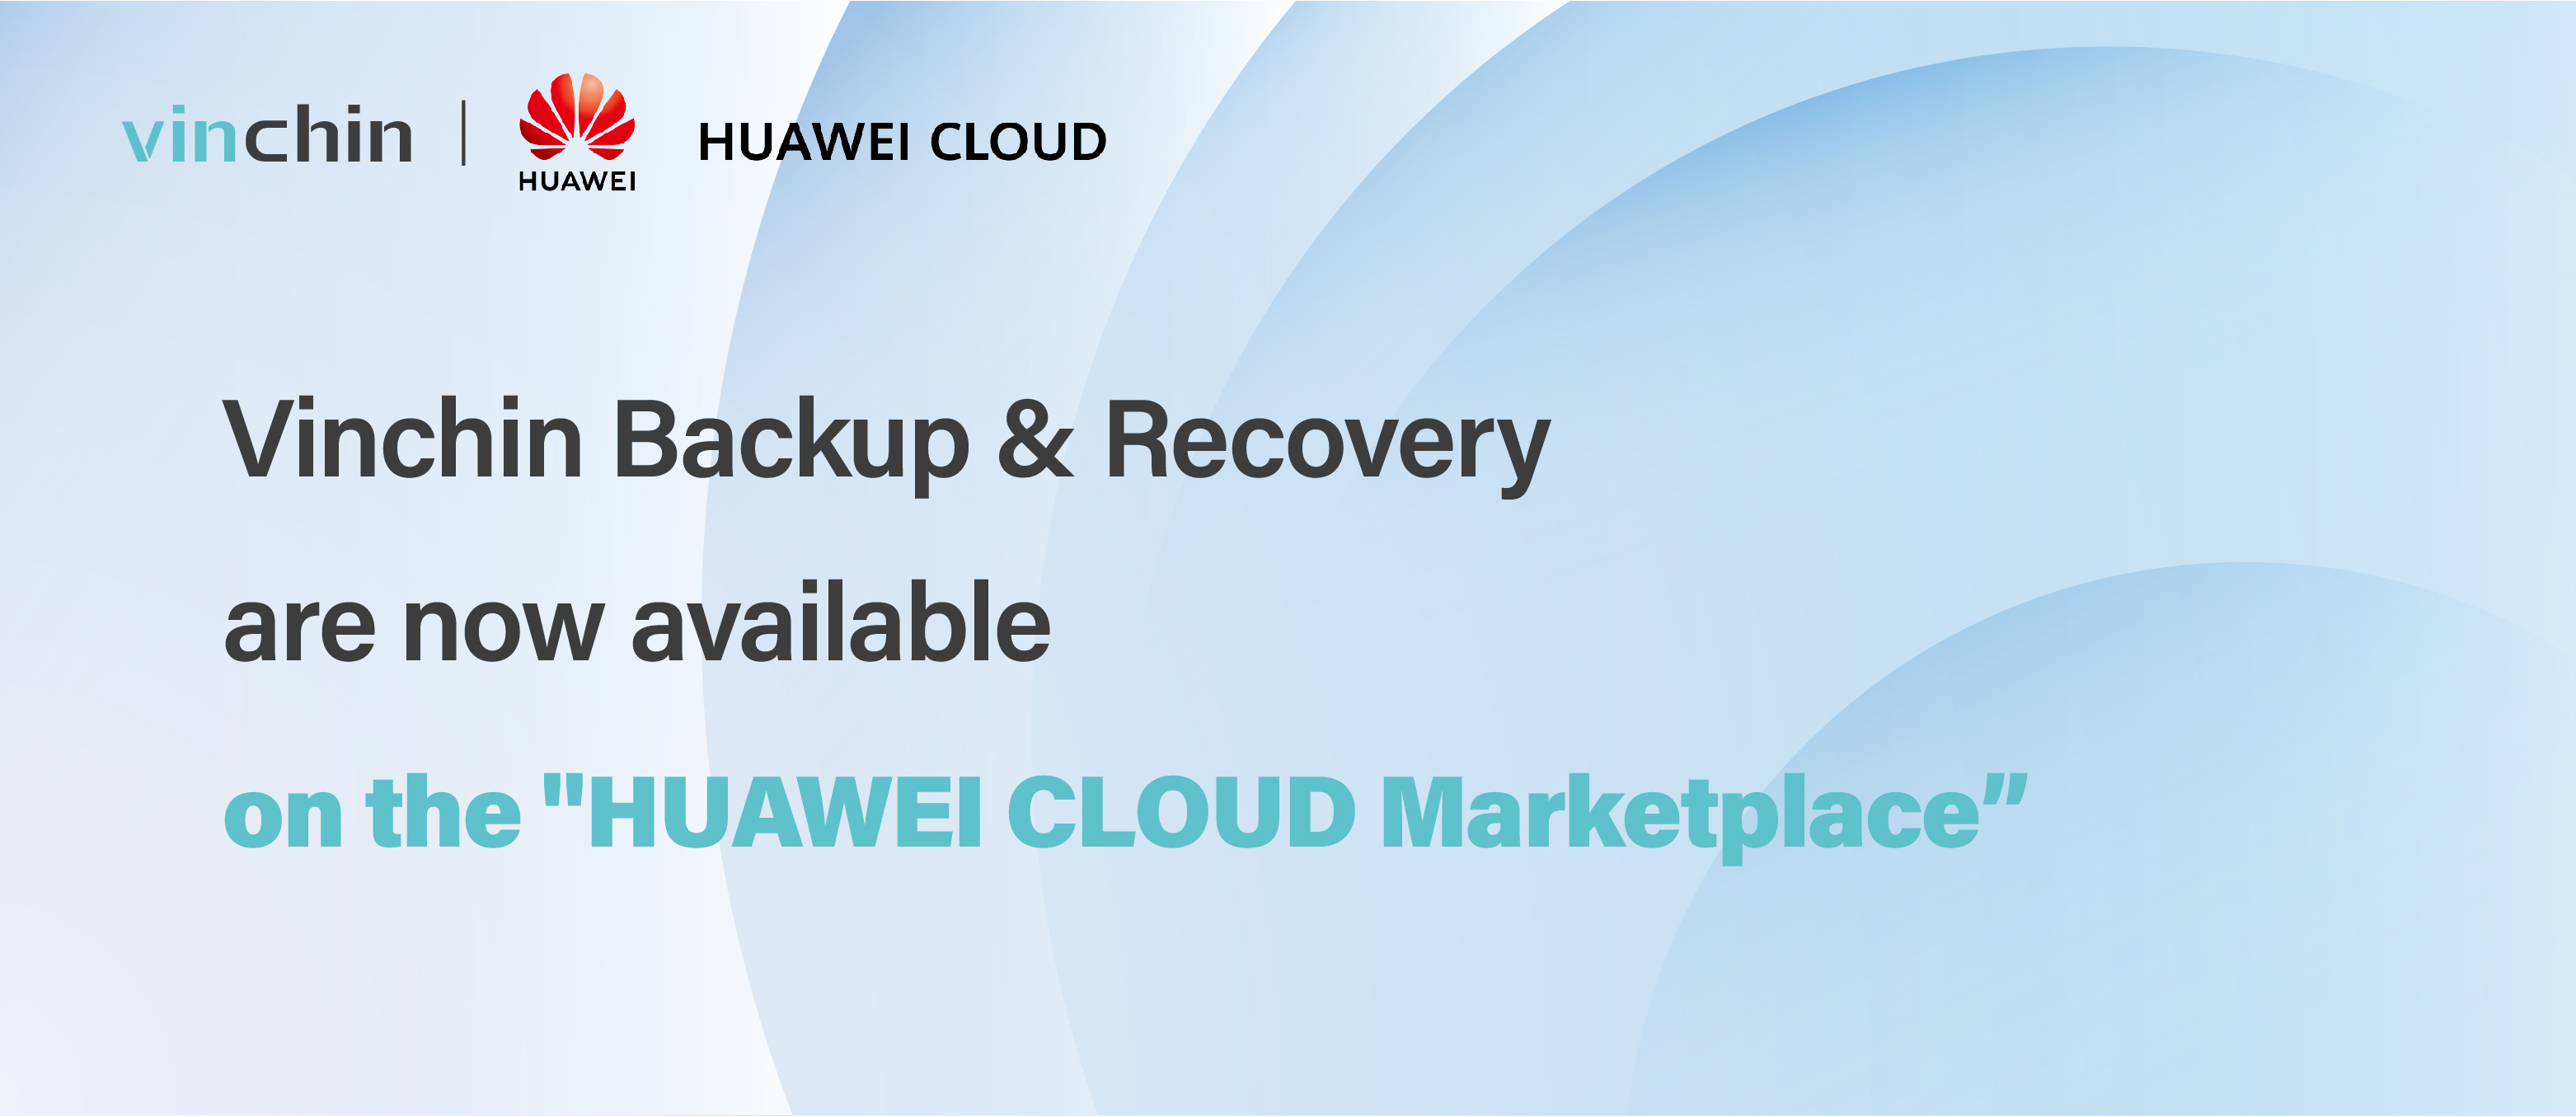 Grand Entrance! Vinchin Backup & Recovery are now available on the HUAWEI CLOUD Marketplace